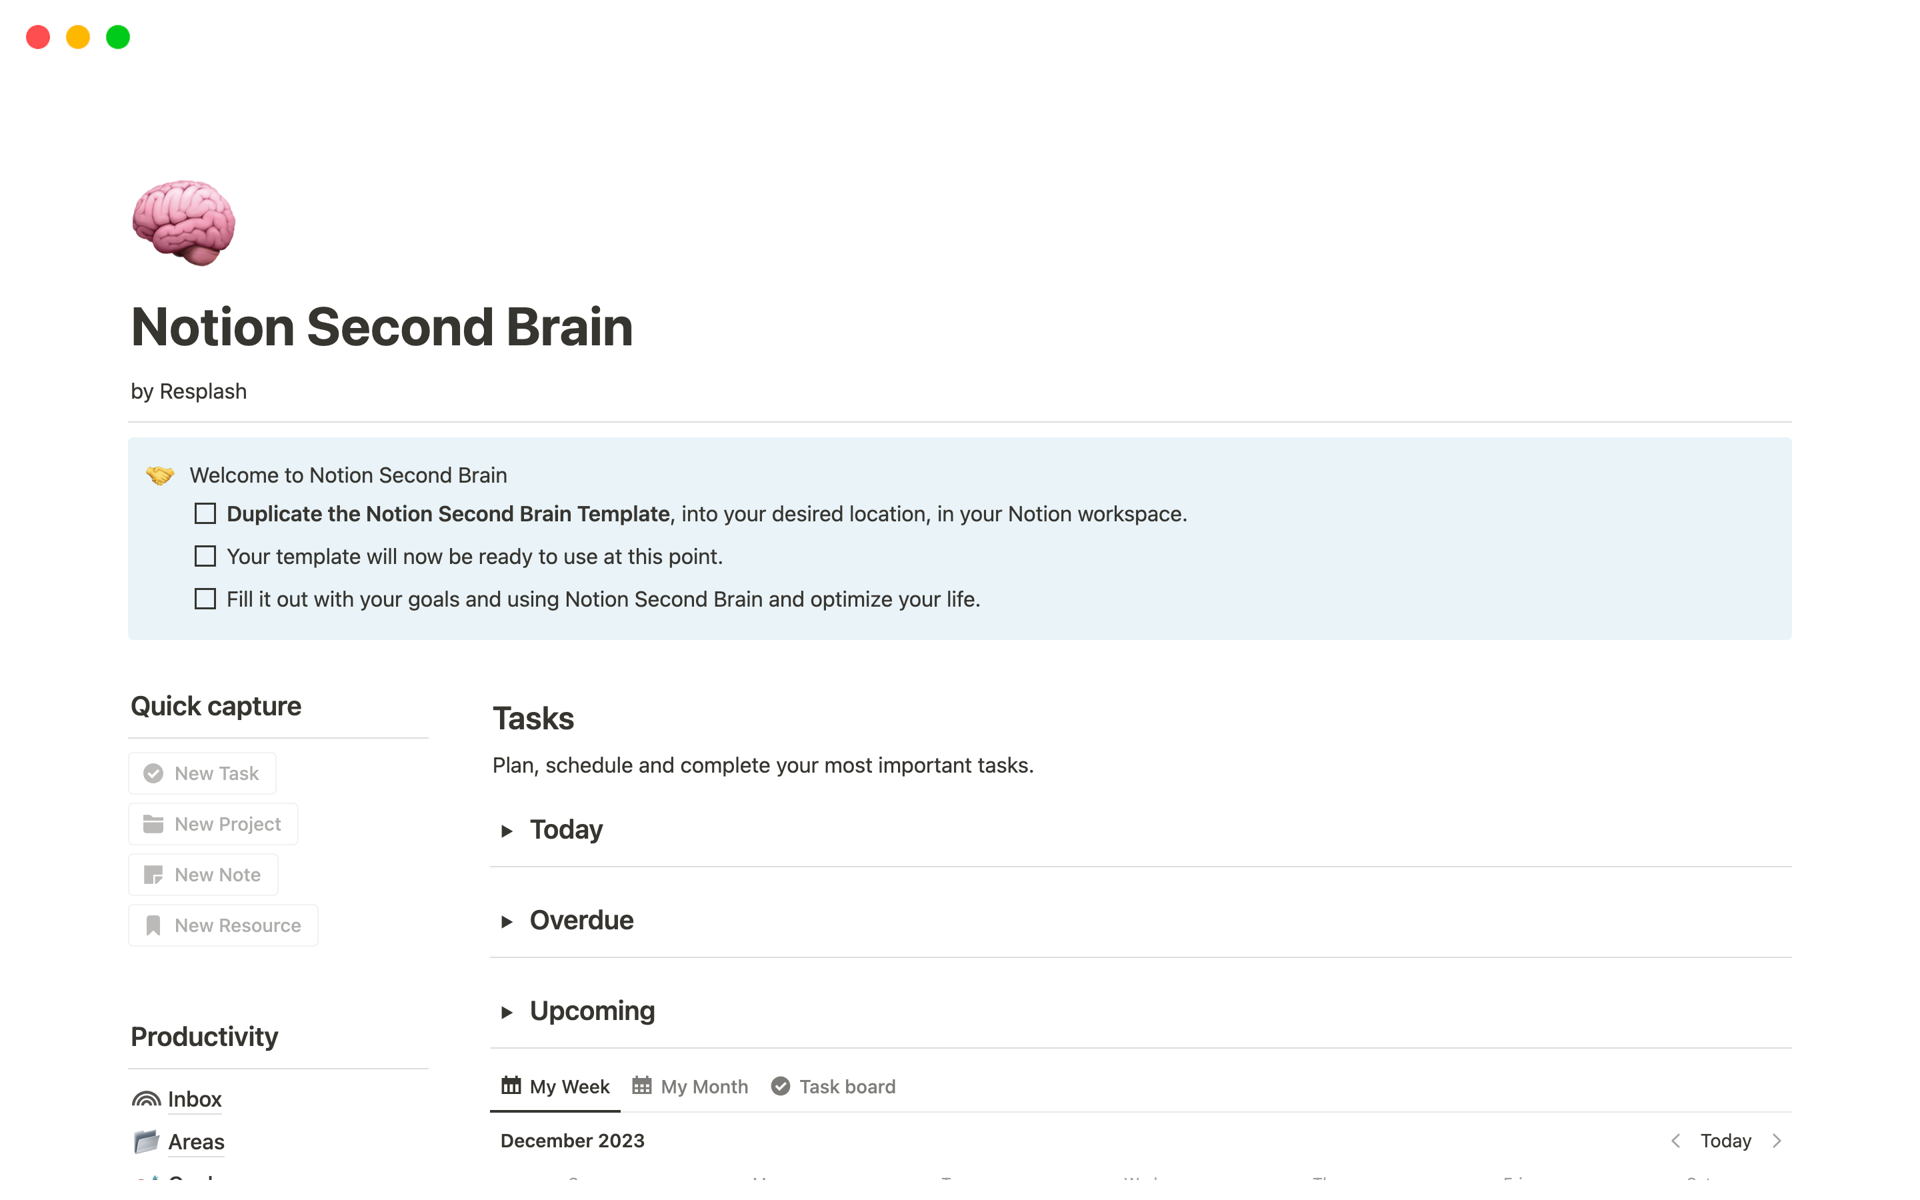 Get Your Life Organized. Build your Second Brain in Notion.